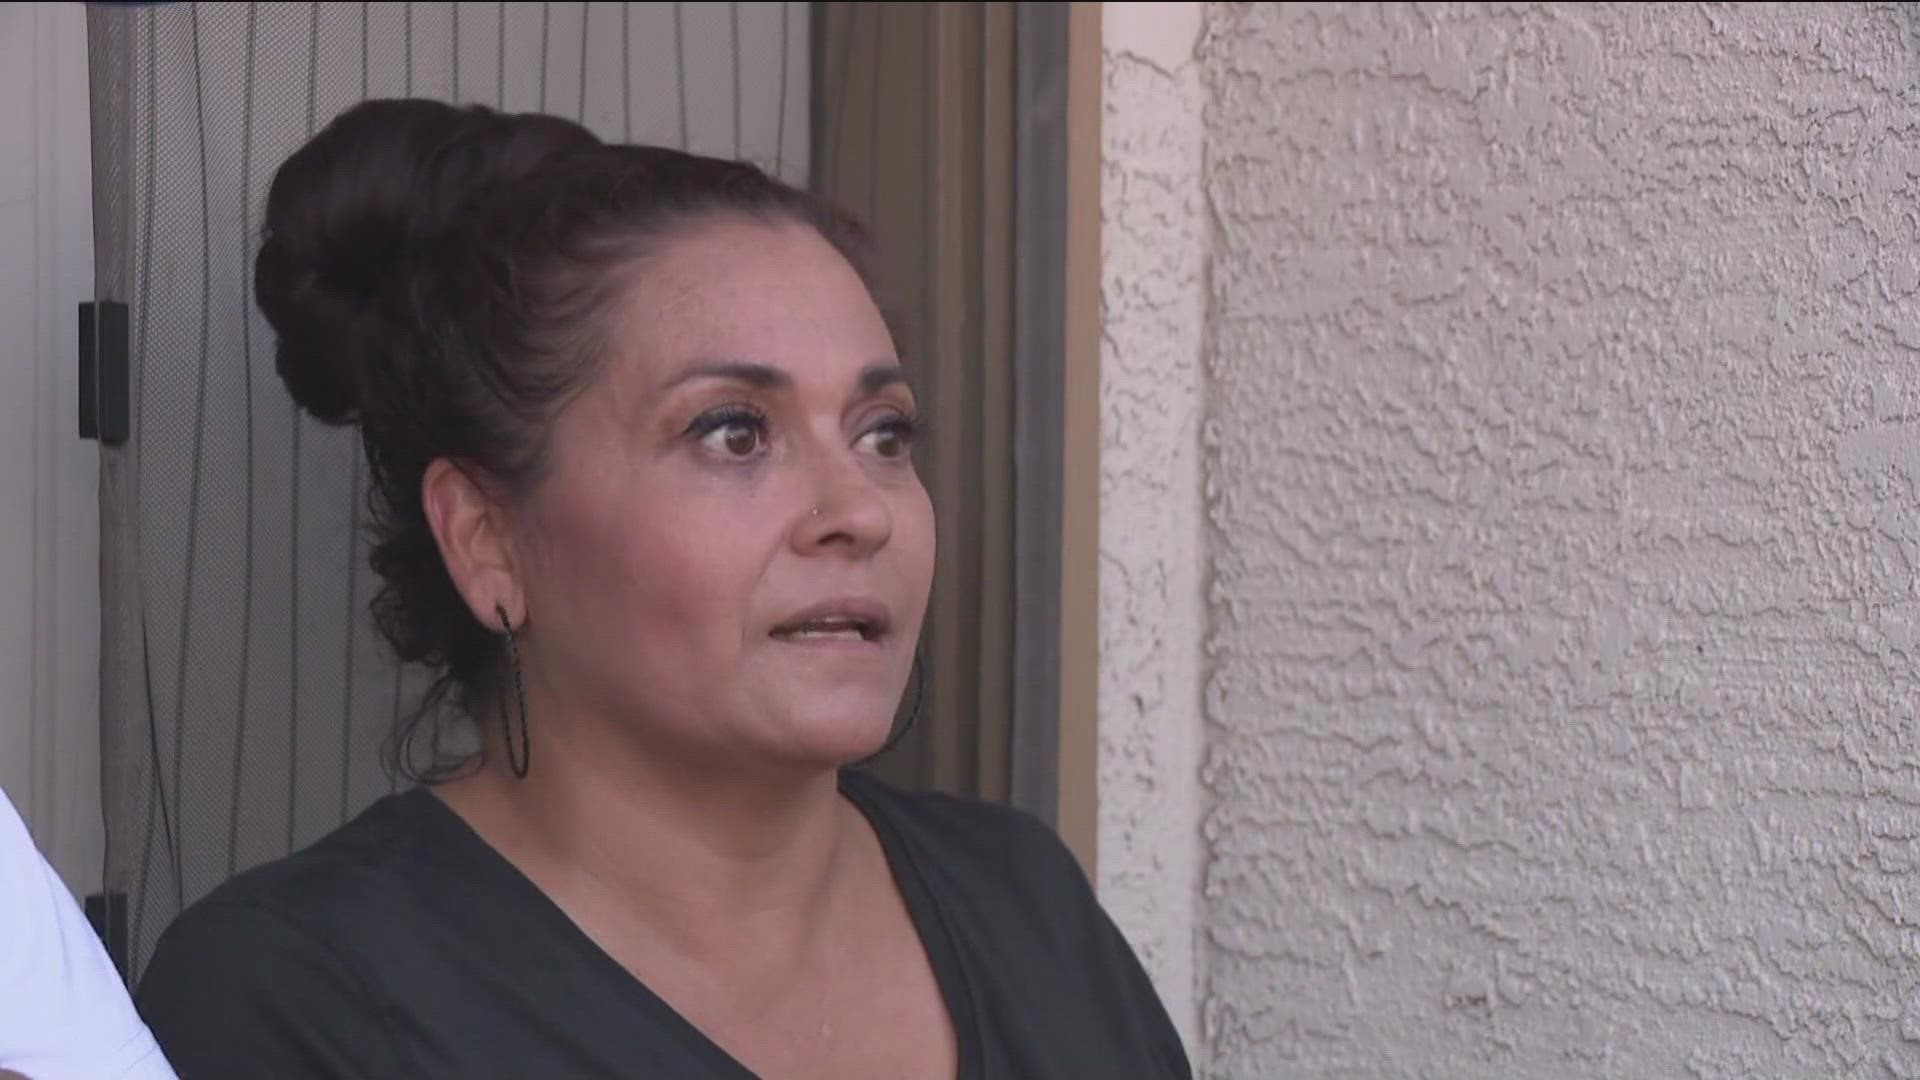 A woman recounts a scuffle between police and parents during lockdown at an El Mirage elementary school.